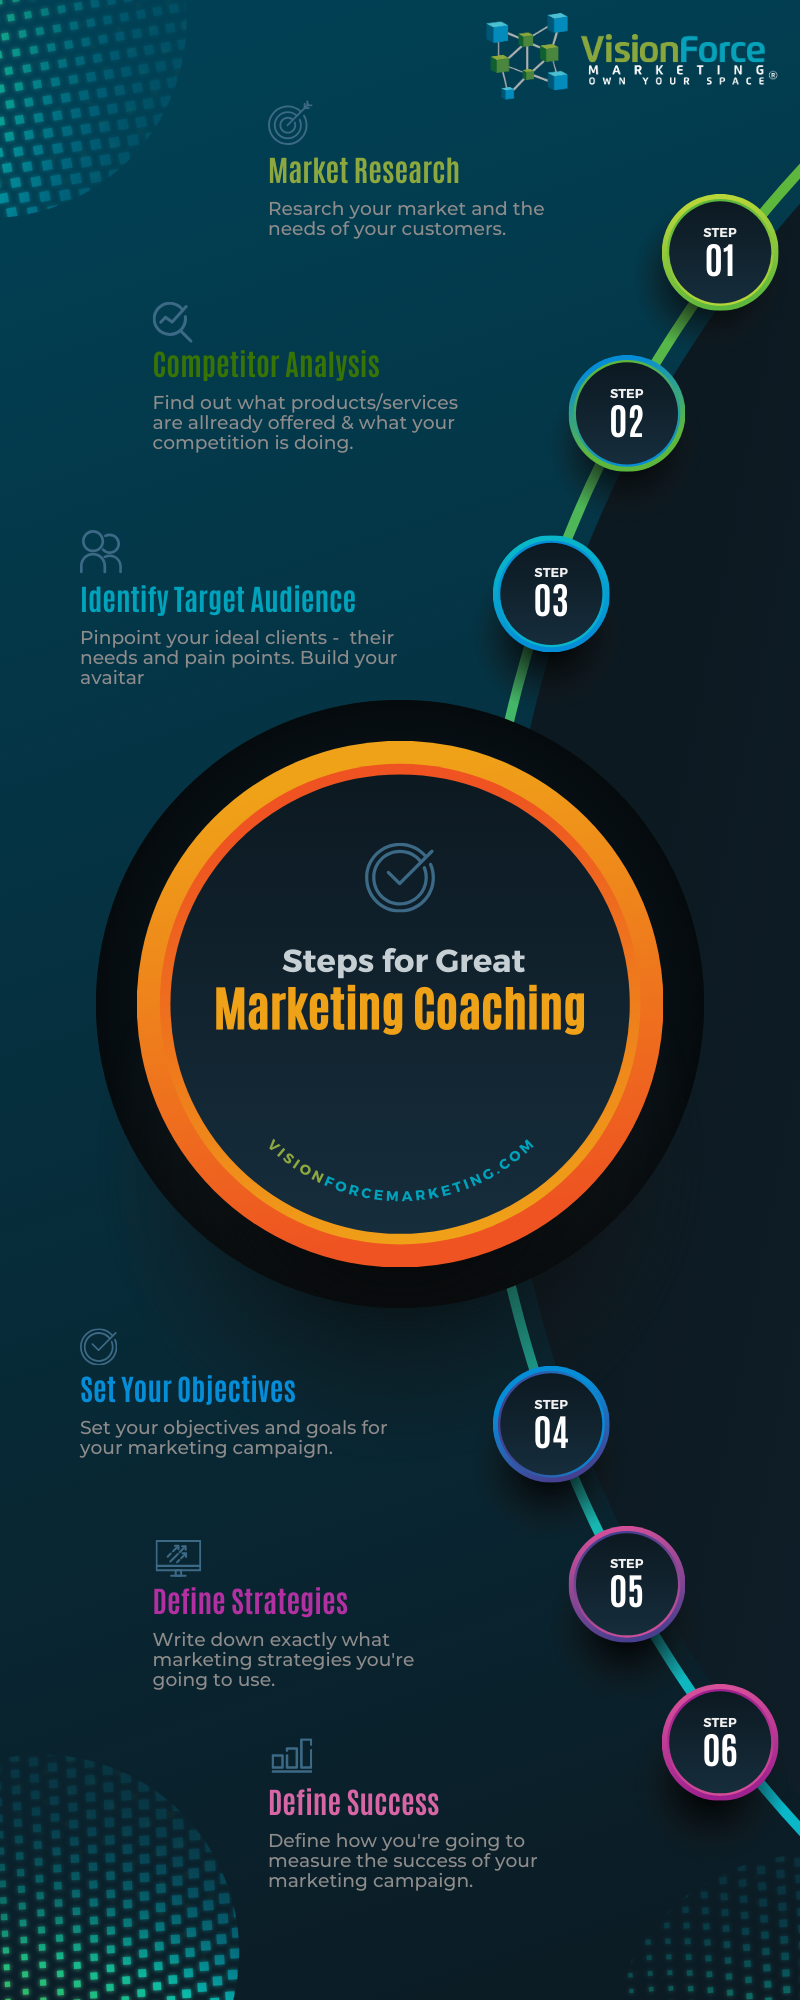 Vision Force Marketing Coaching Infographic